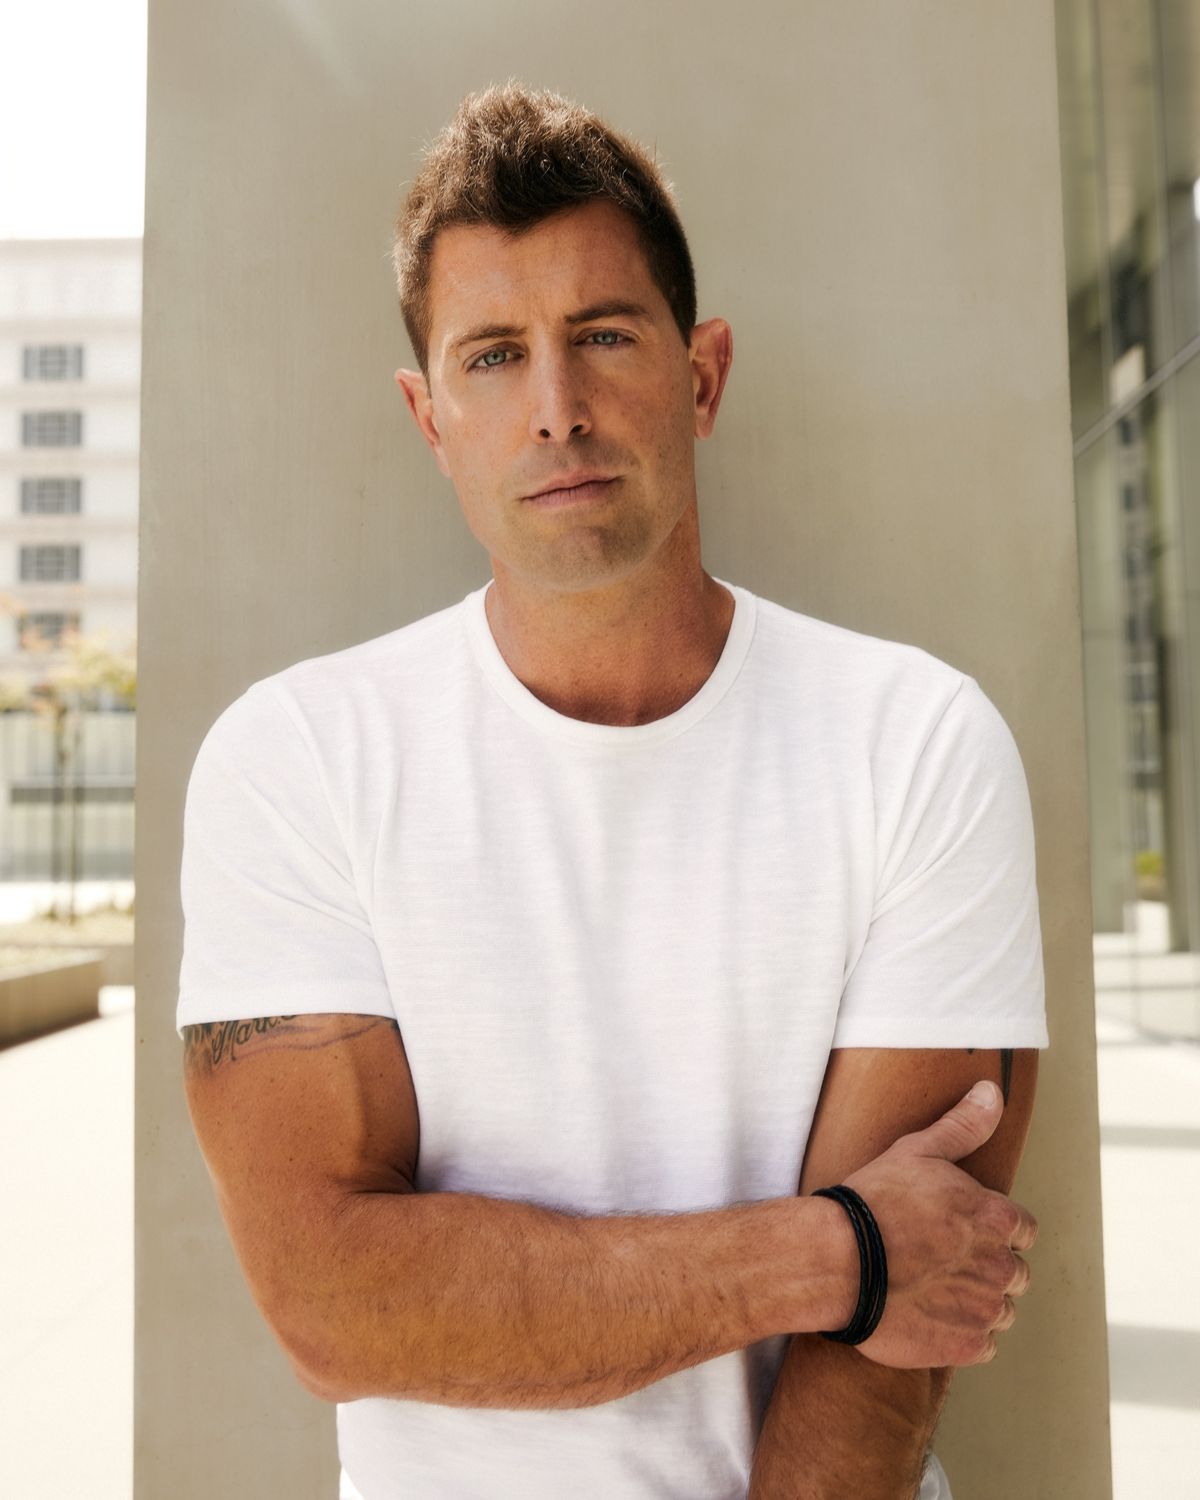 Jeremy Camp is one of the Christian music acts featured on this year’s Winter Jam tour, which comes to the Spokane Arena on Sunday.  (Courtesy photo)